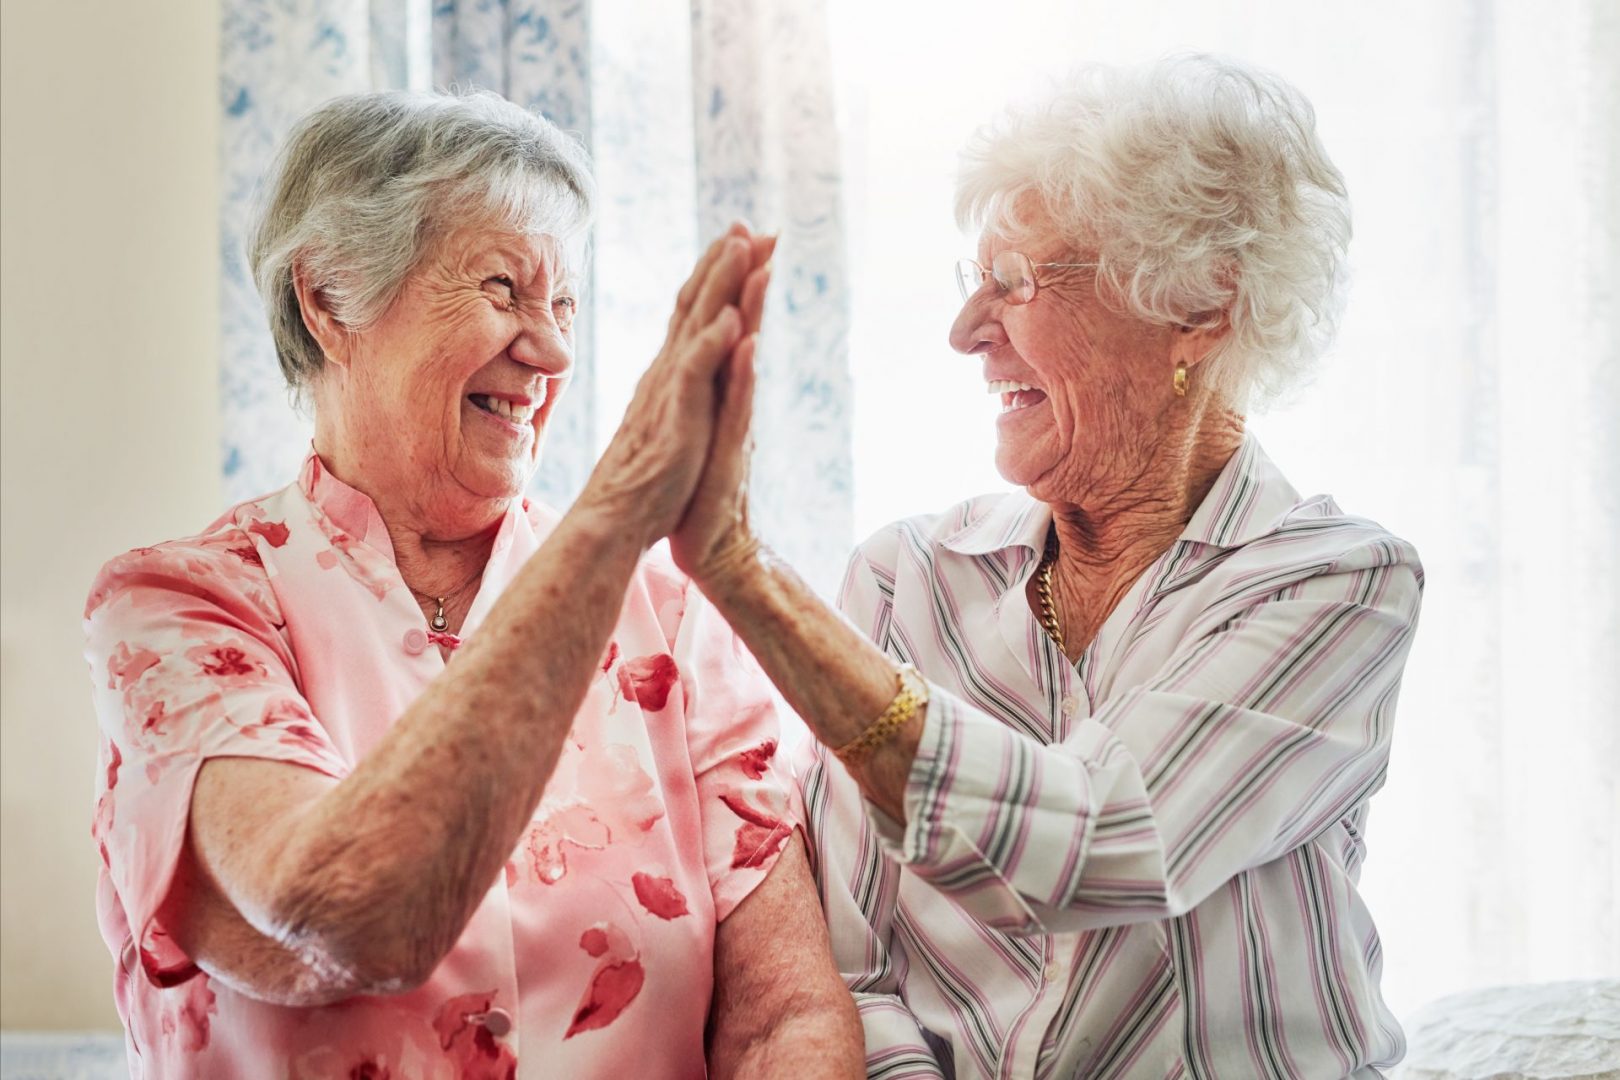 Two elderly women, smiling and giving a high-five in a bright, well-lit room with floral curtains.